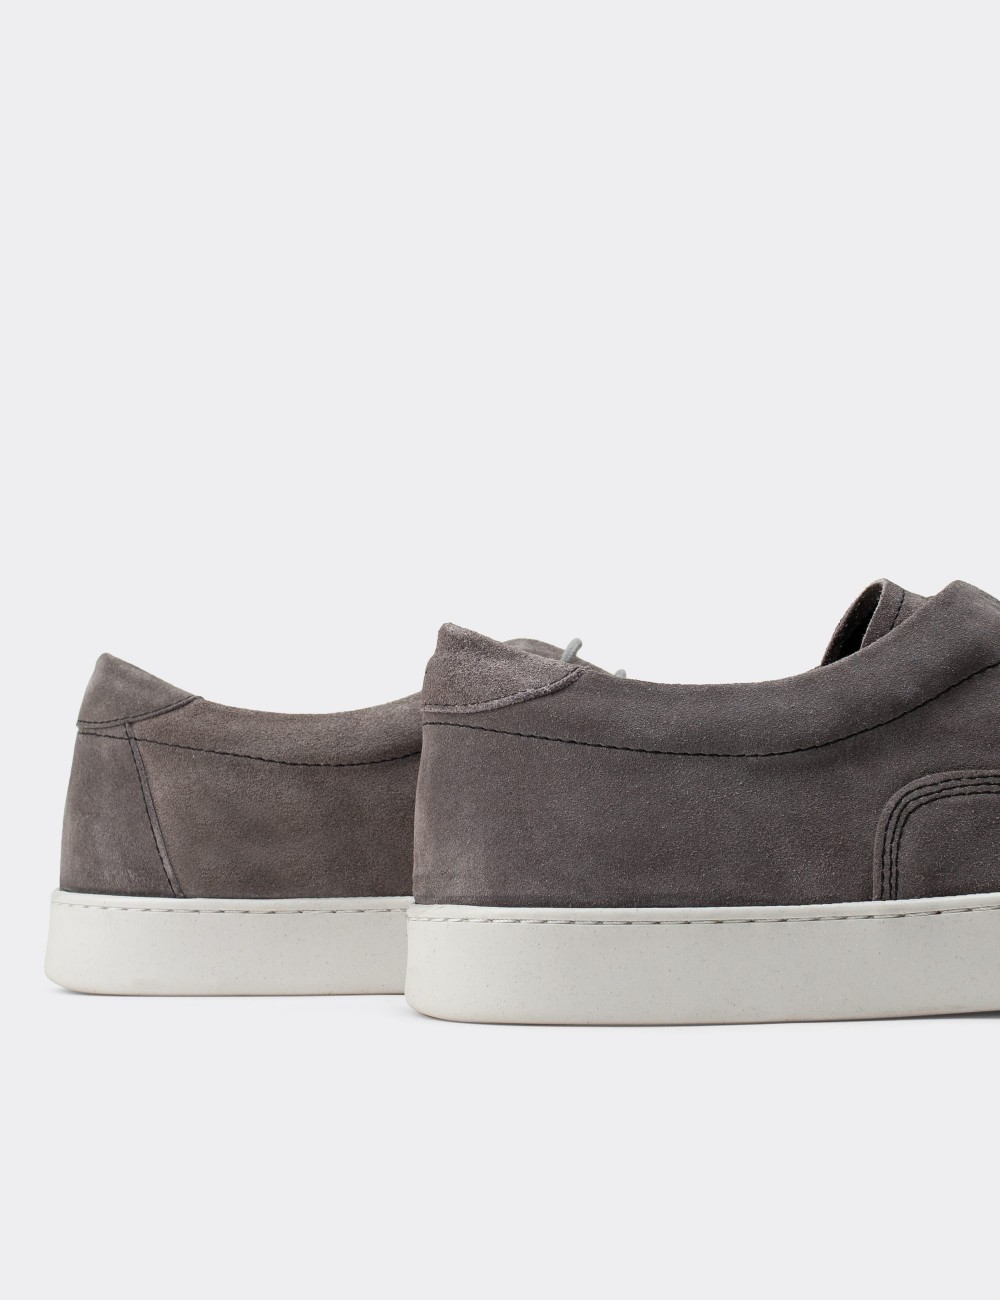 Gray Suede Leather Sneakers - 01867MGRIC01